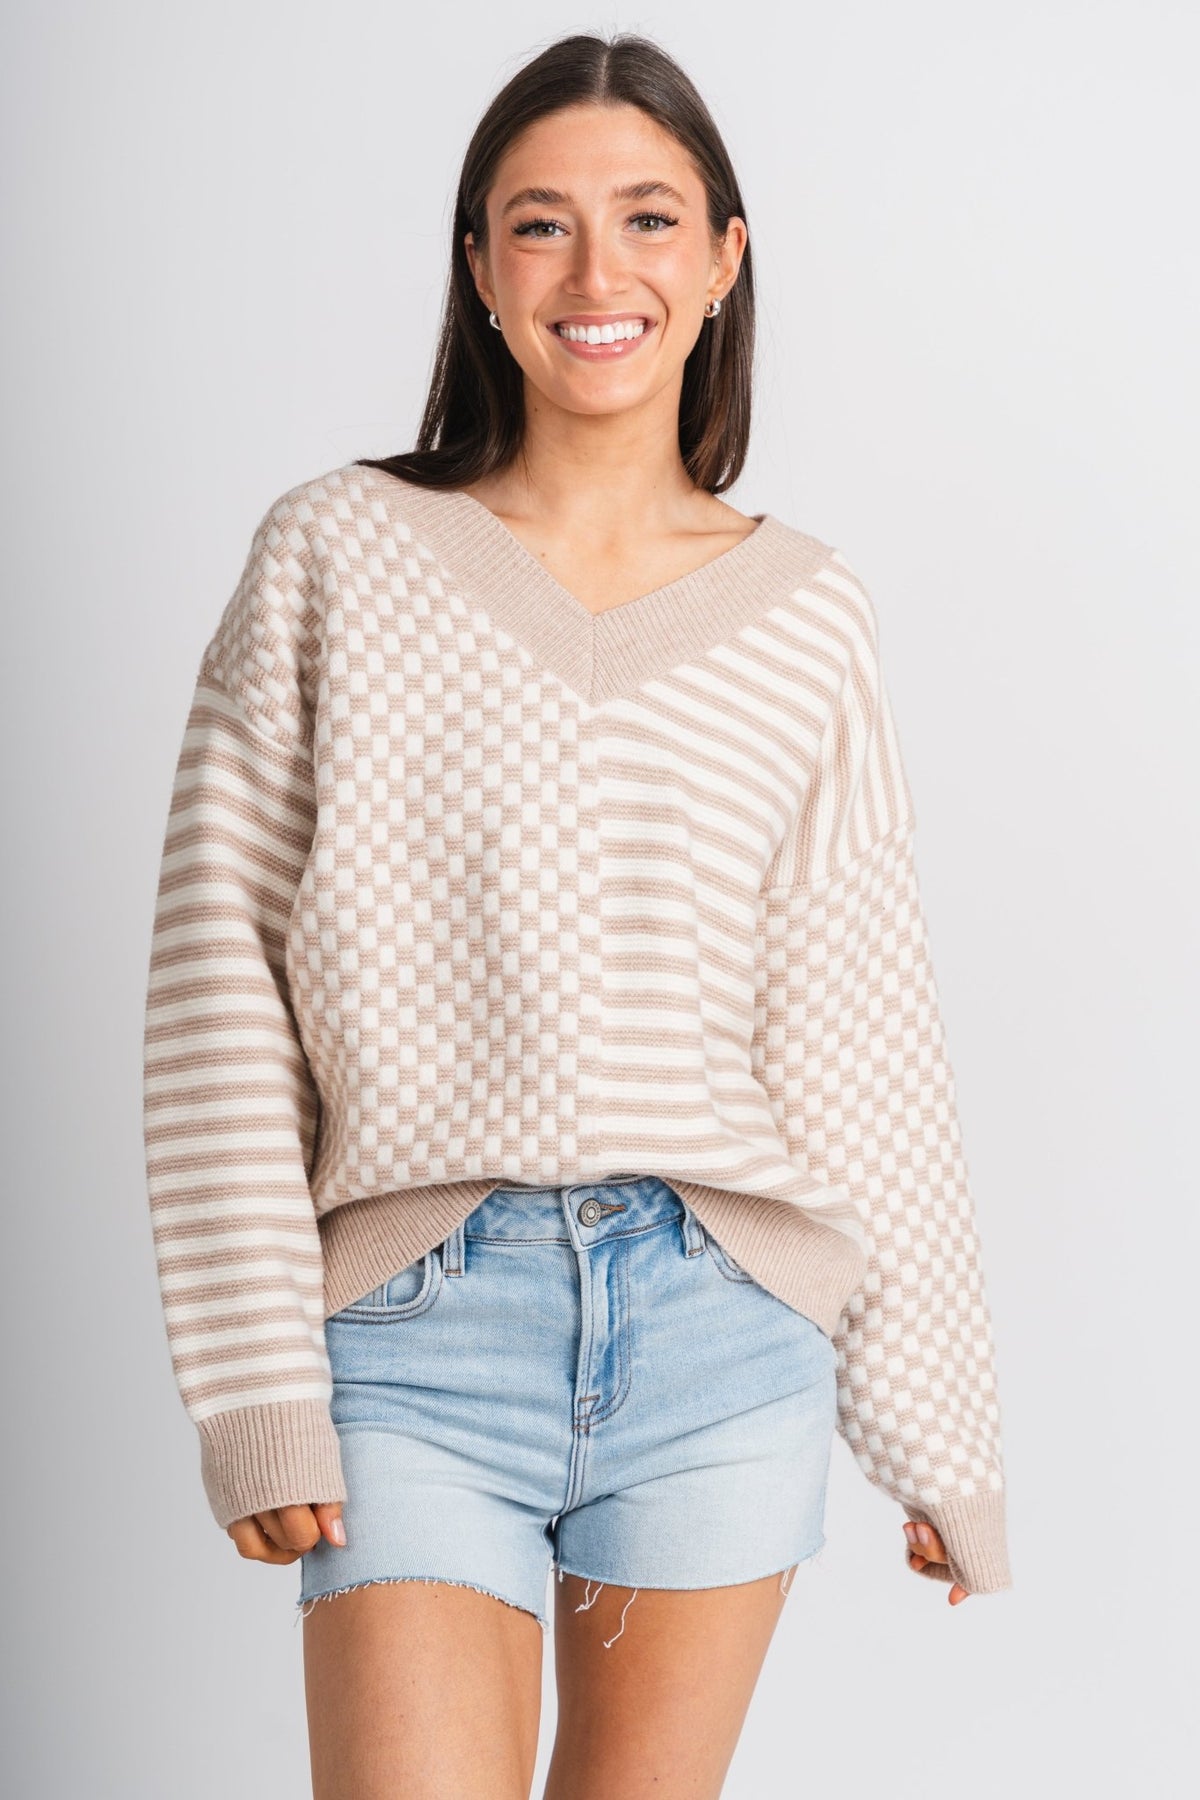 Checkered sweater ivory/taupe – Boutique Sweaters | Fashionable Sweaters at Lush Fashion Lounge Boutique in Oklahoma City